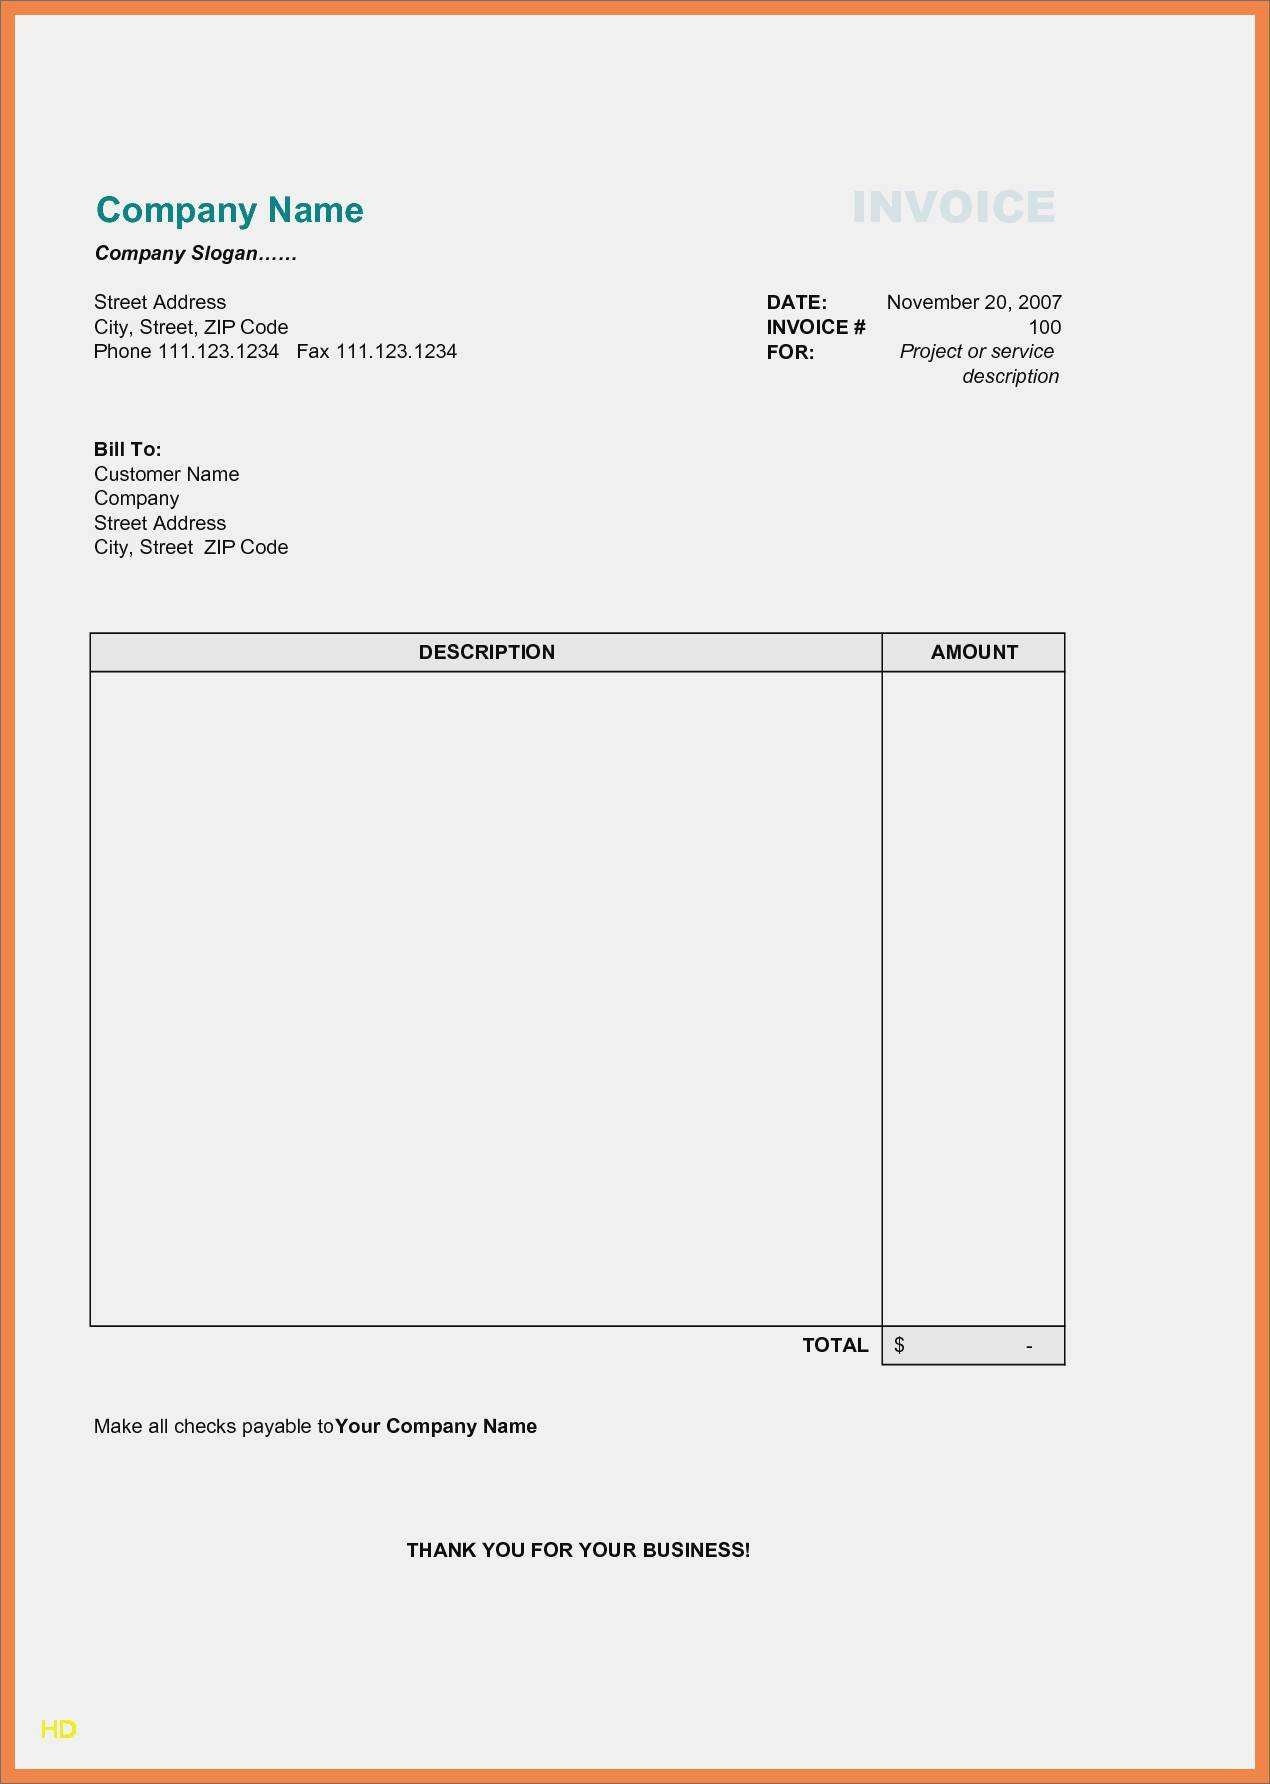 32 Blank Blank Generic Invoice Template With Stunning Design by Blank Generic Invoice Template